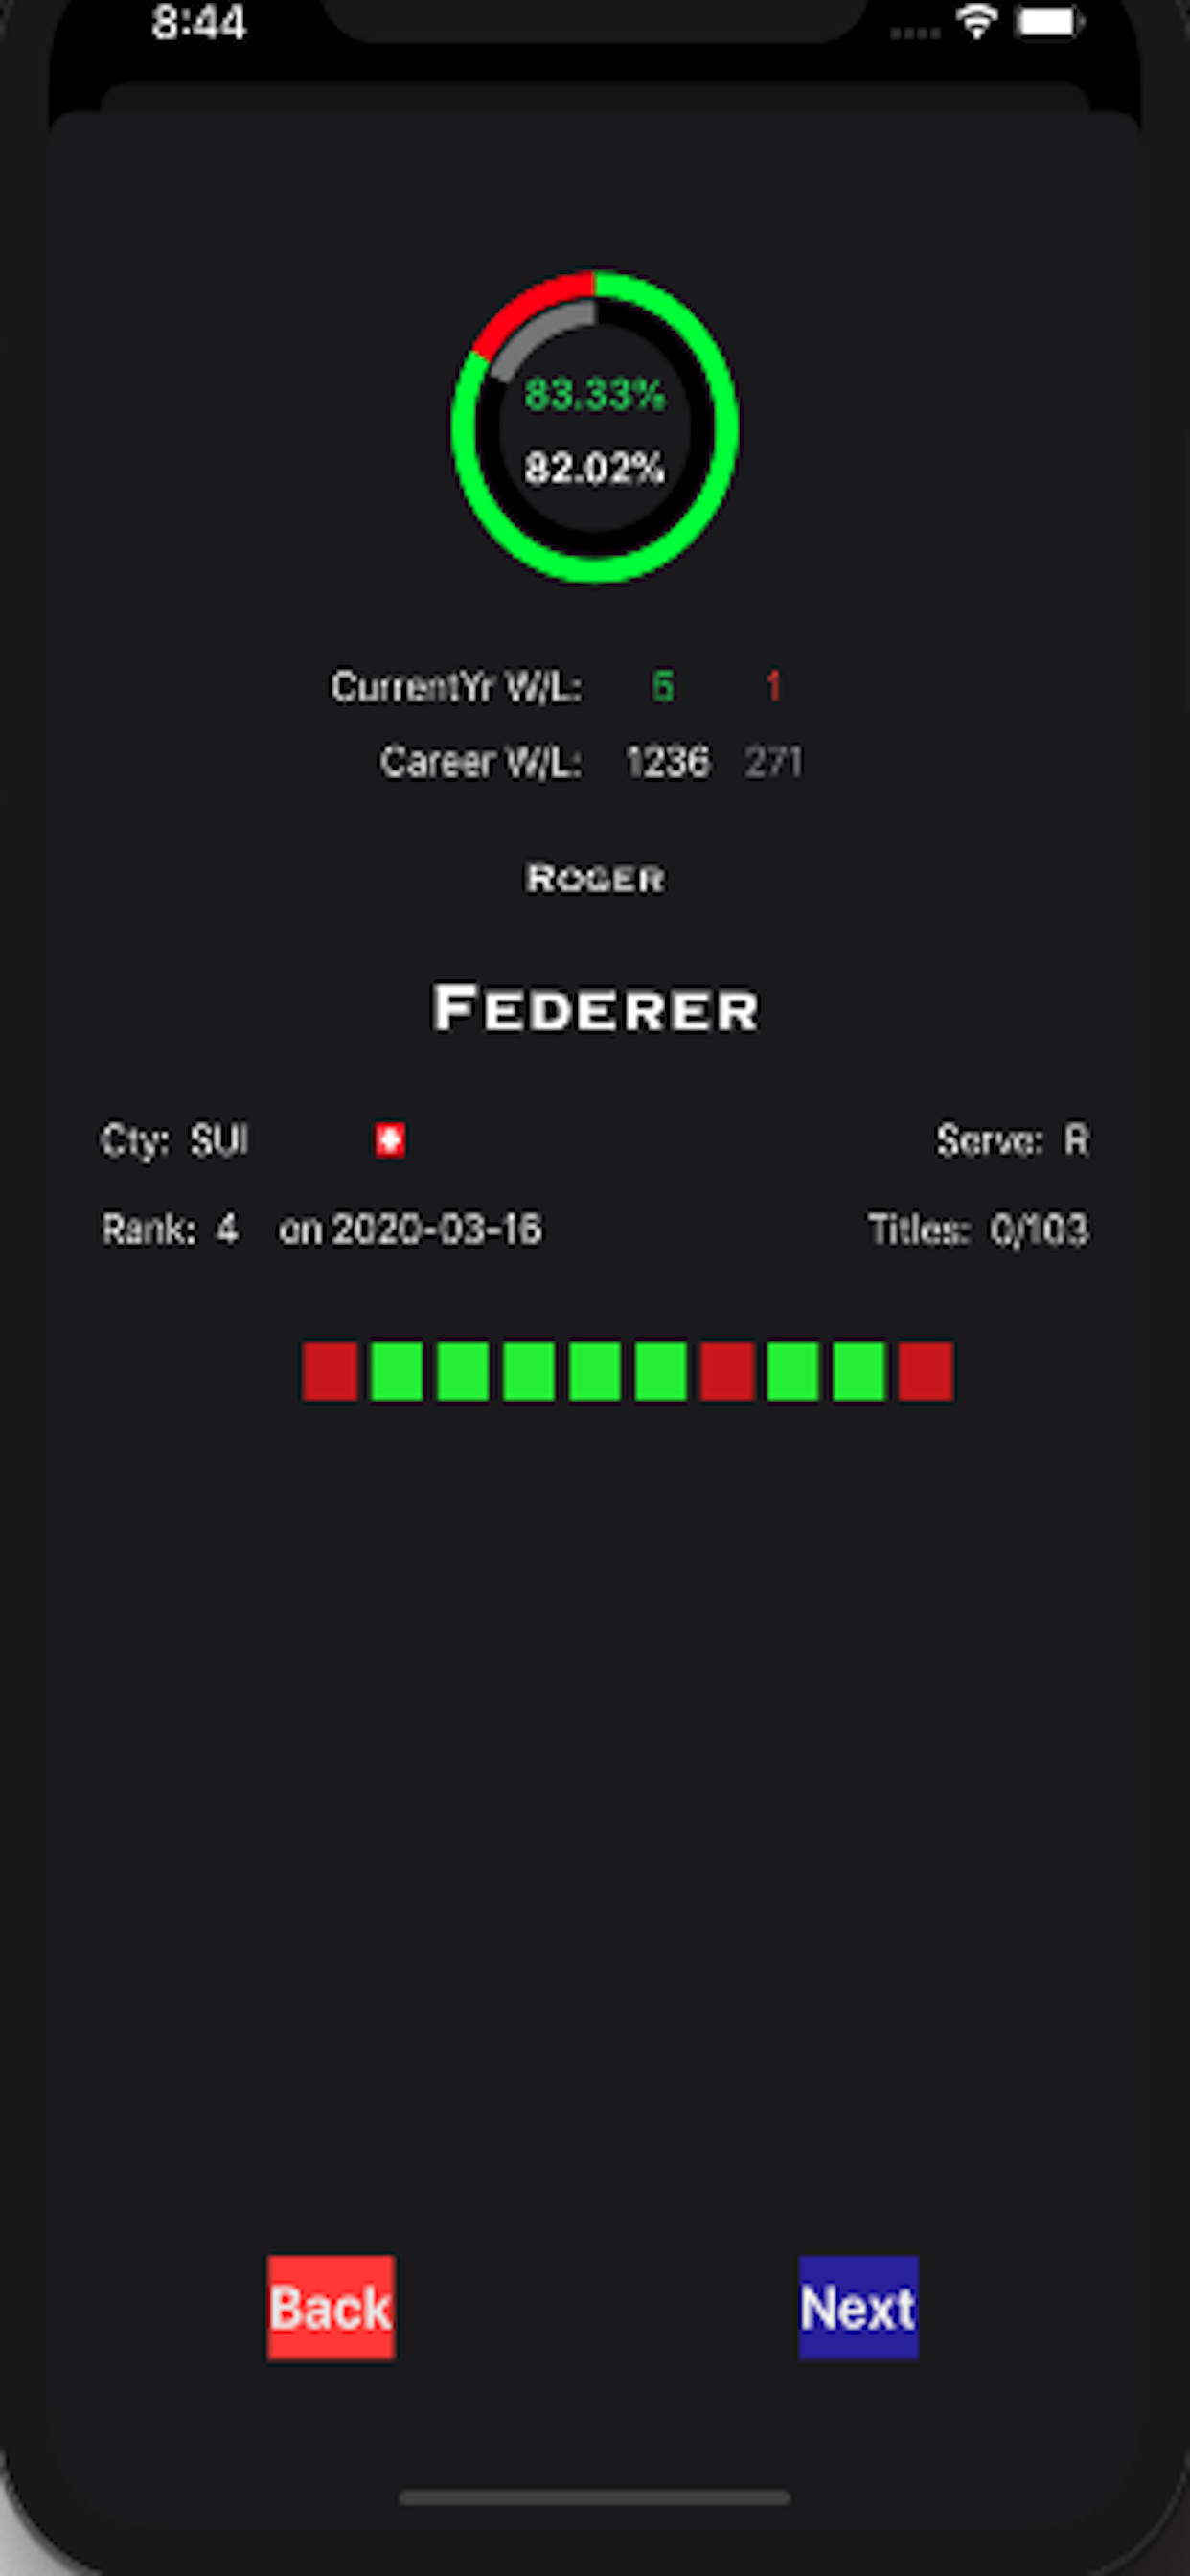 Version 2 of tennisdata Now in the App Store